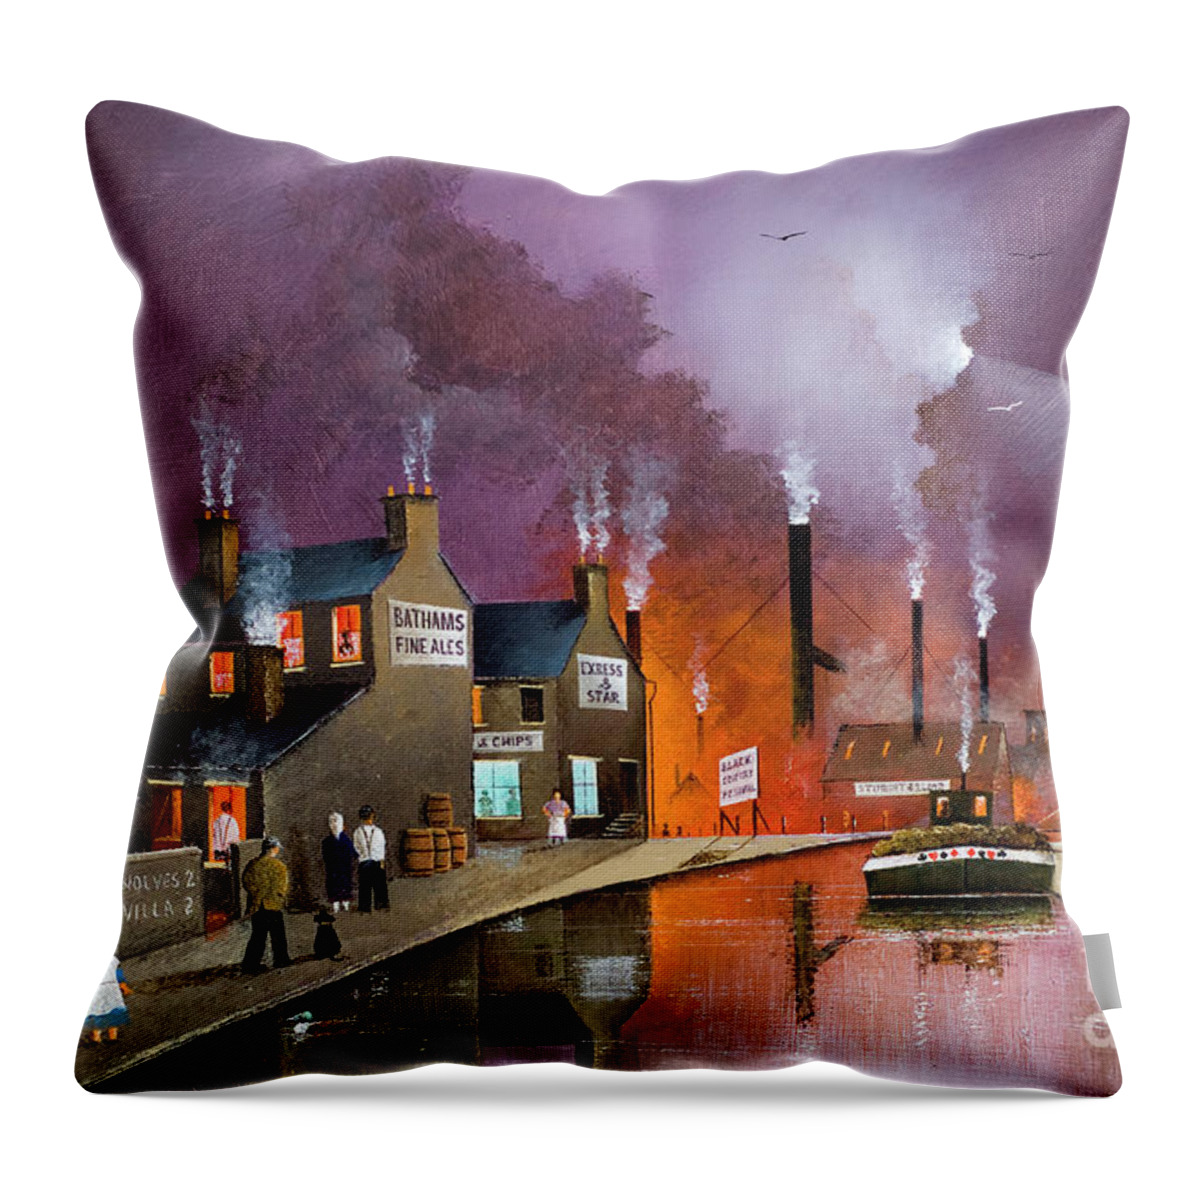 England Throw Pillow featuring the painting A Blackcountry Community - England by Ken Wood